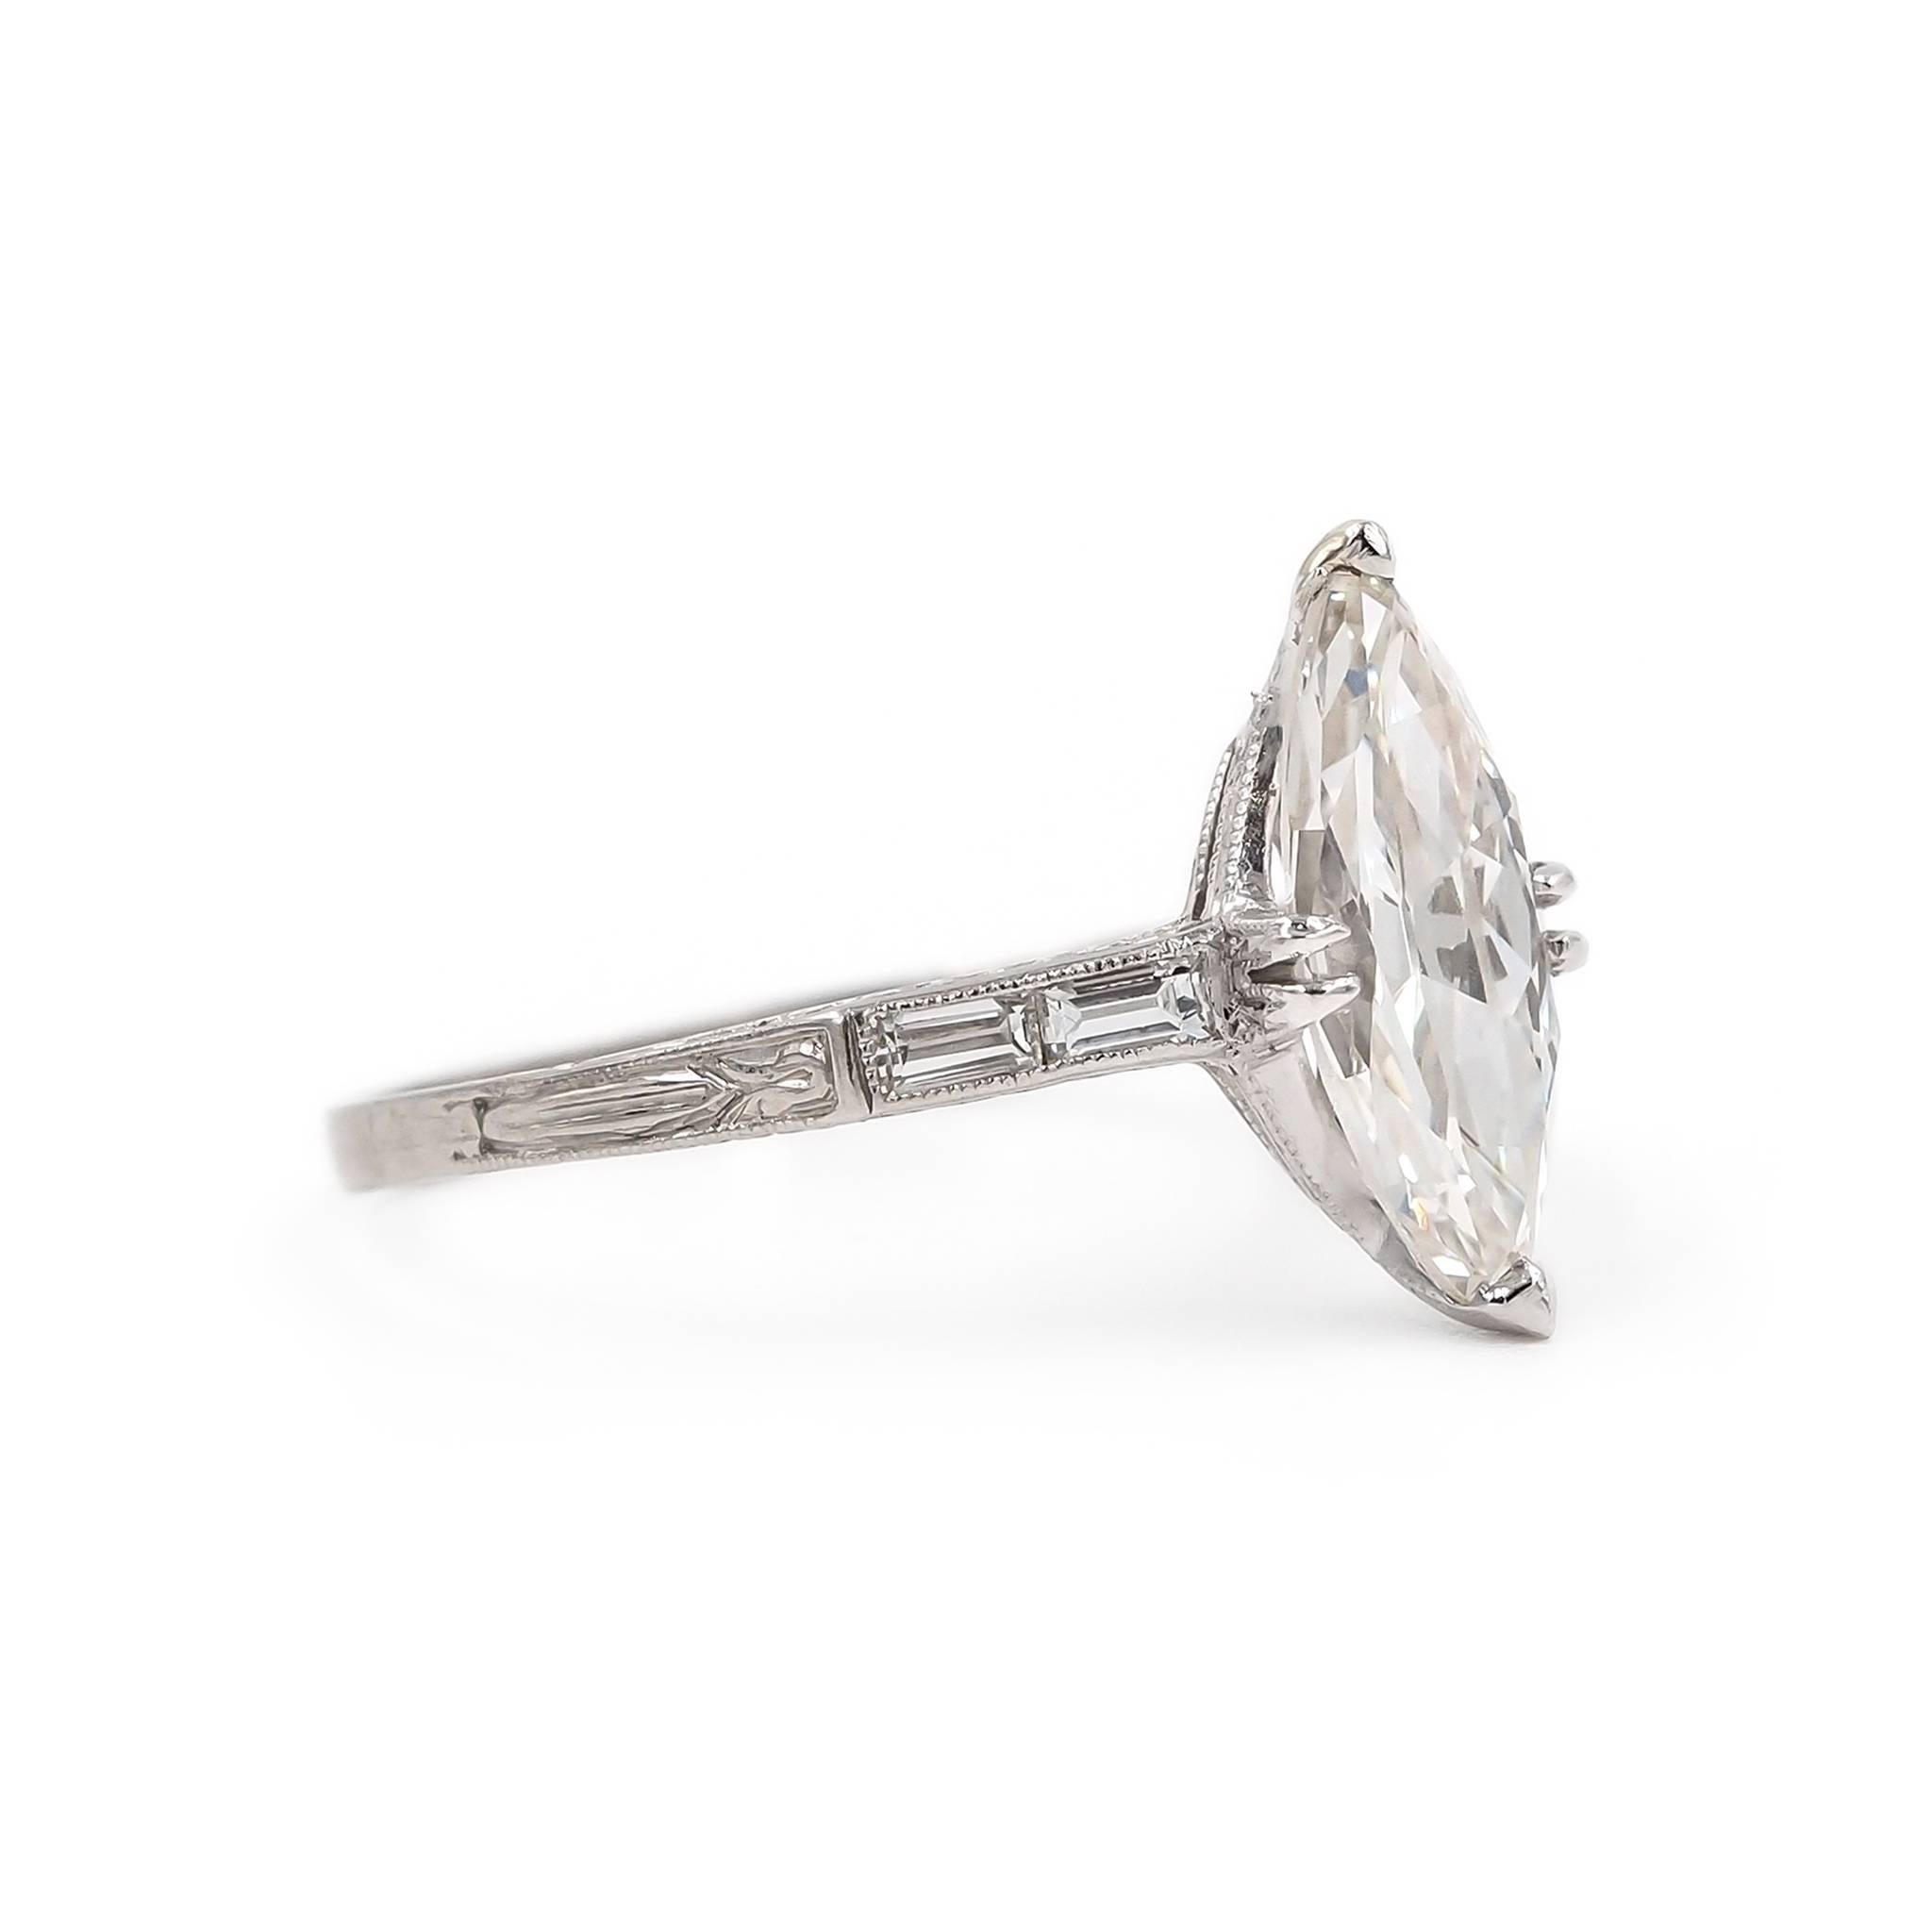 Classic Art Deco handcrafted design in platinum. This Art Deco era engagement ring (circa 1930) features a center stone 1.75 Carat Antique Marquise Cut Diamond. Accented with 4 Straight Baguette Cut Diamonds (2 on each side) weighing 0.12 Ct. in